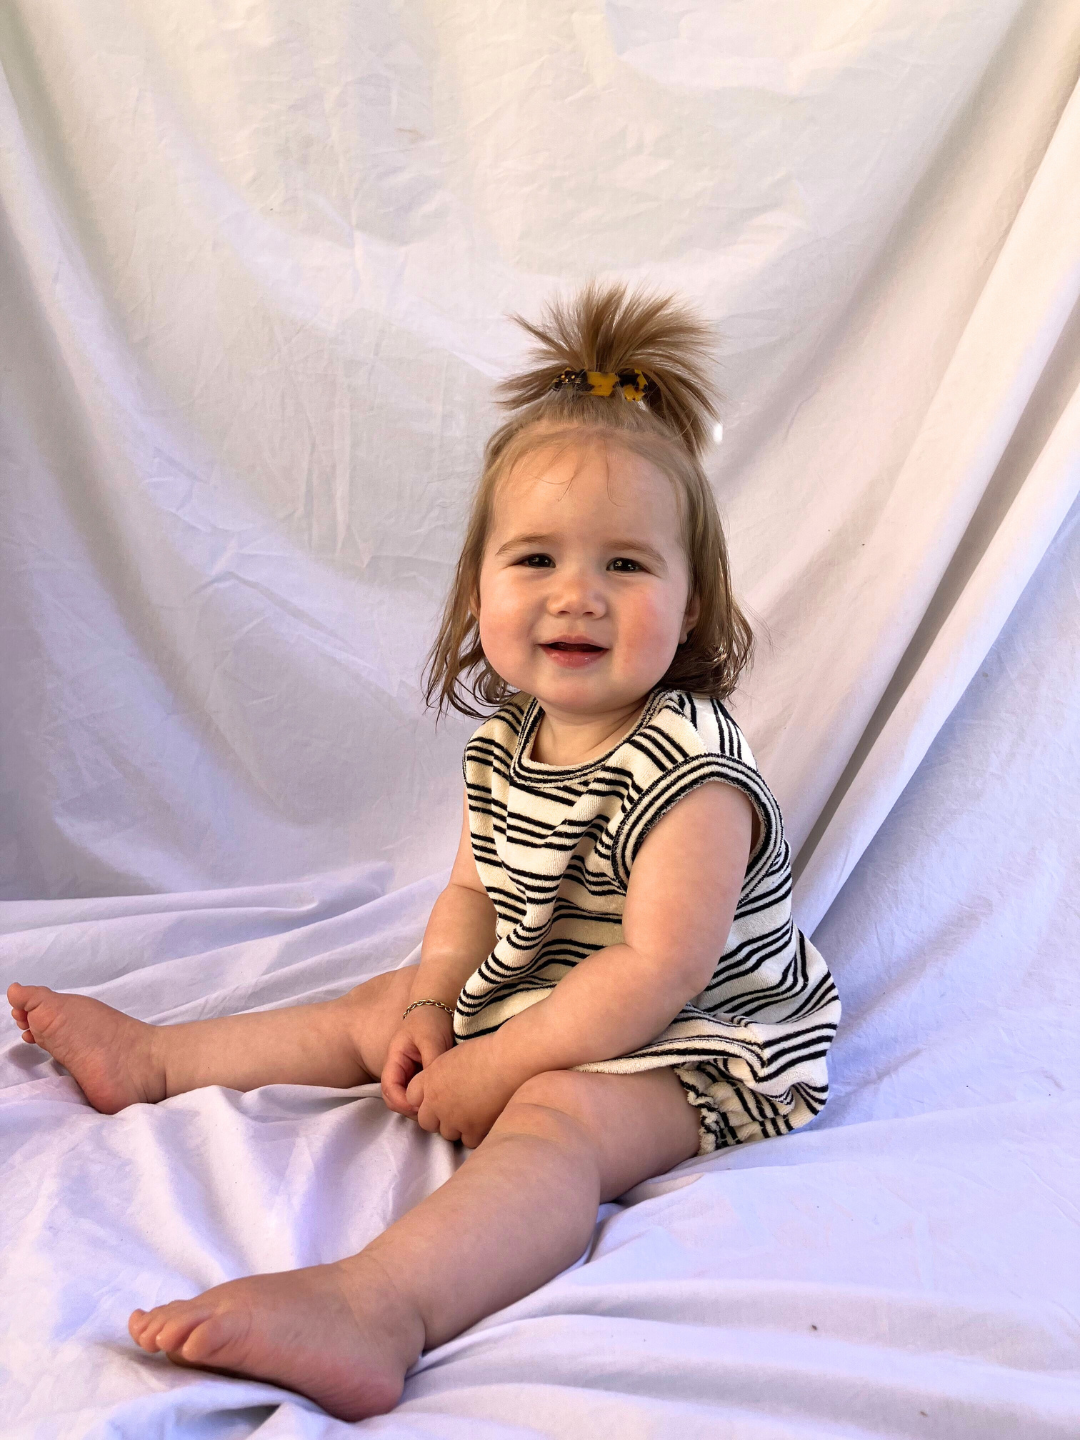 Stripe | A toddler wearing the Terry Bubble Bodysuit in cream terrycloth printed with black stripes. She wears a high ponytail and a gold bracelet, and is seated on a beige cloth backdrop.